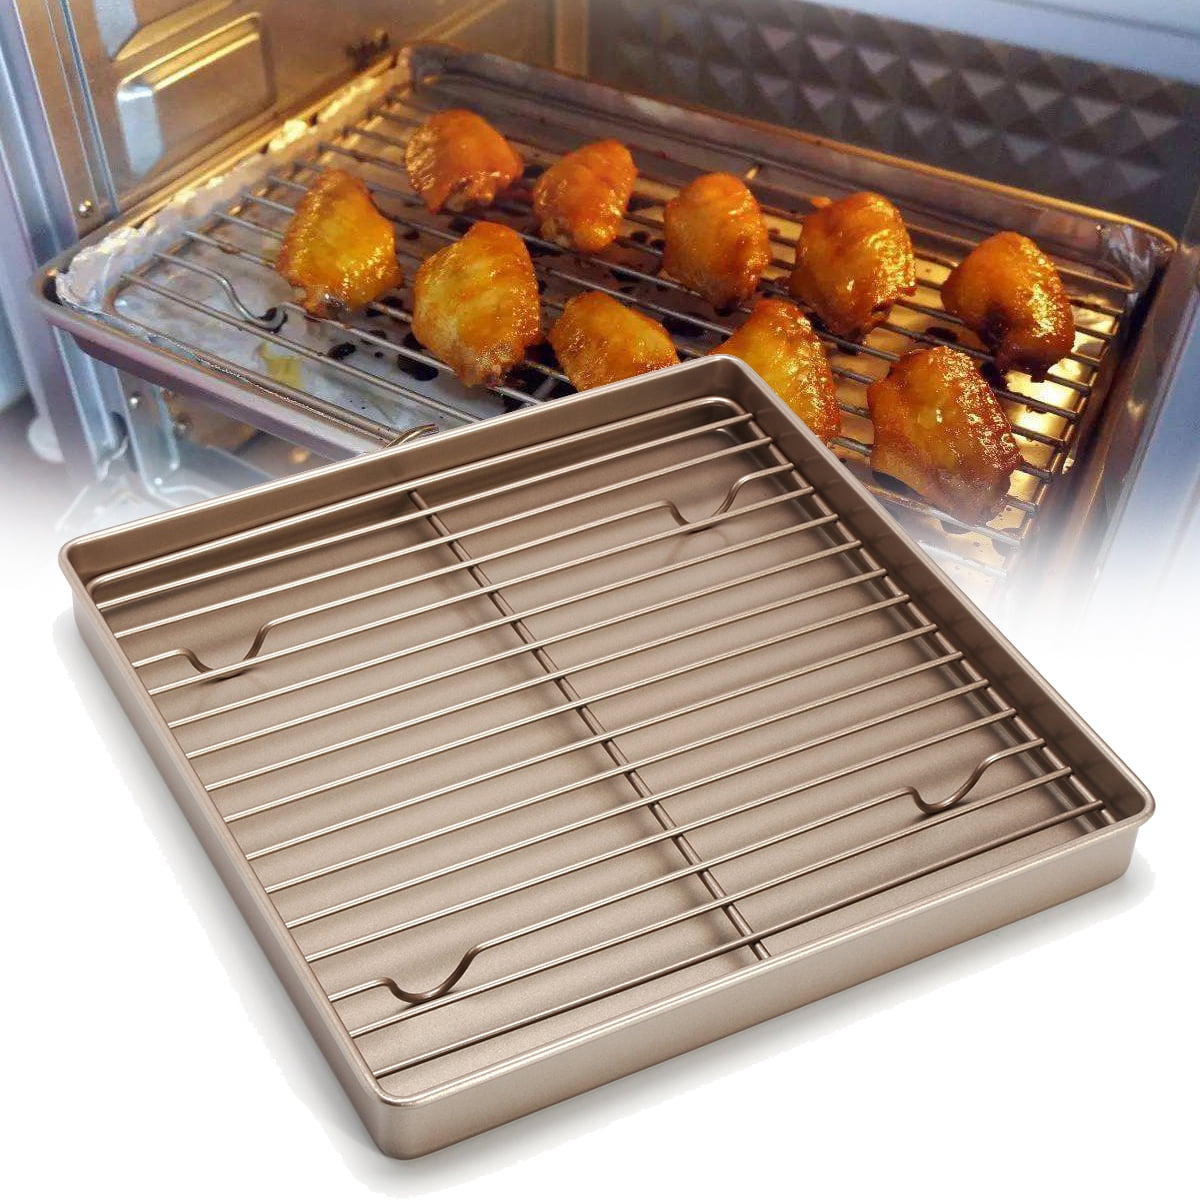 Stainless Steel Wire Cooling Rack & Nonstick Baking Cake Pan for Baking Cooling Cookies, Cakes